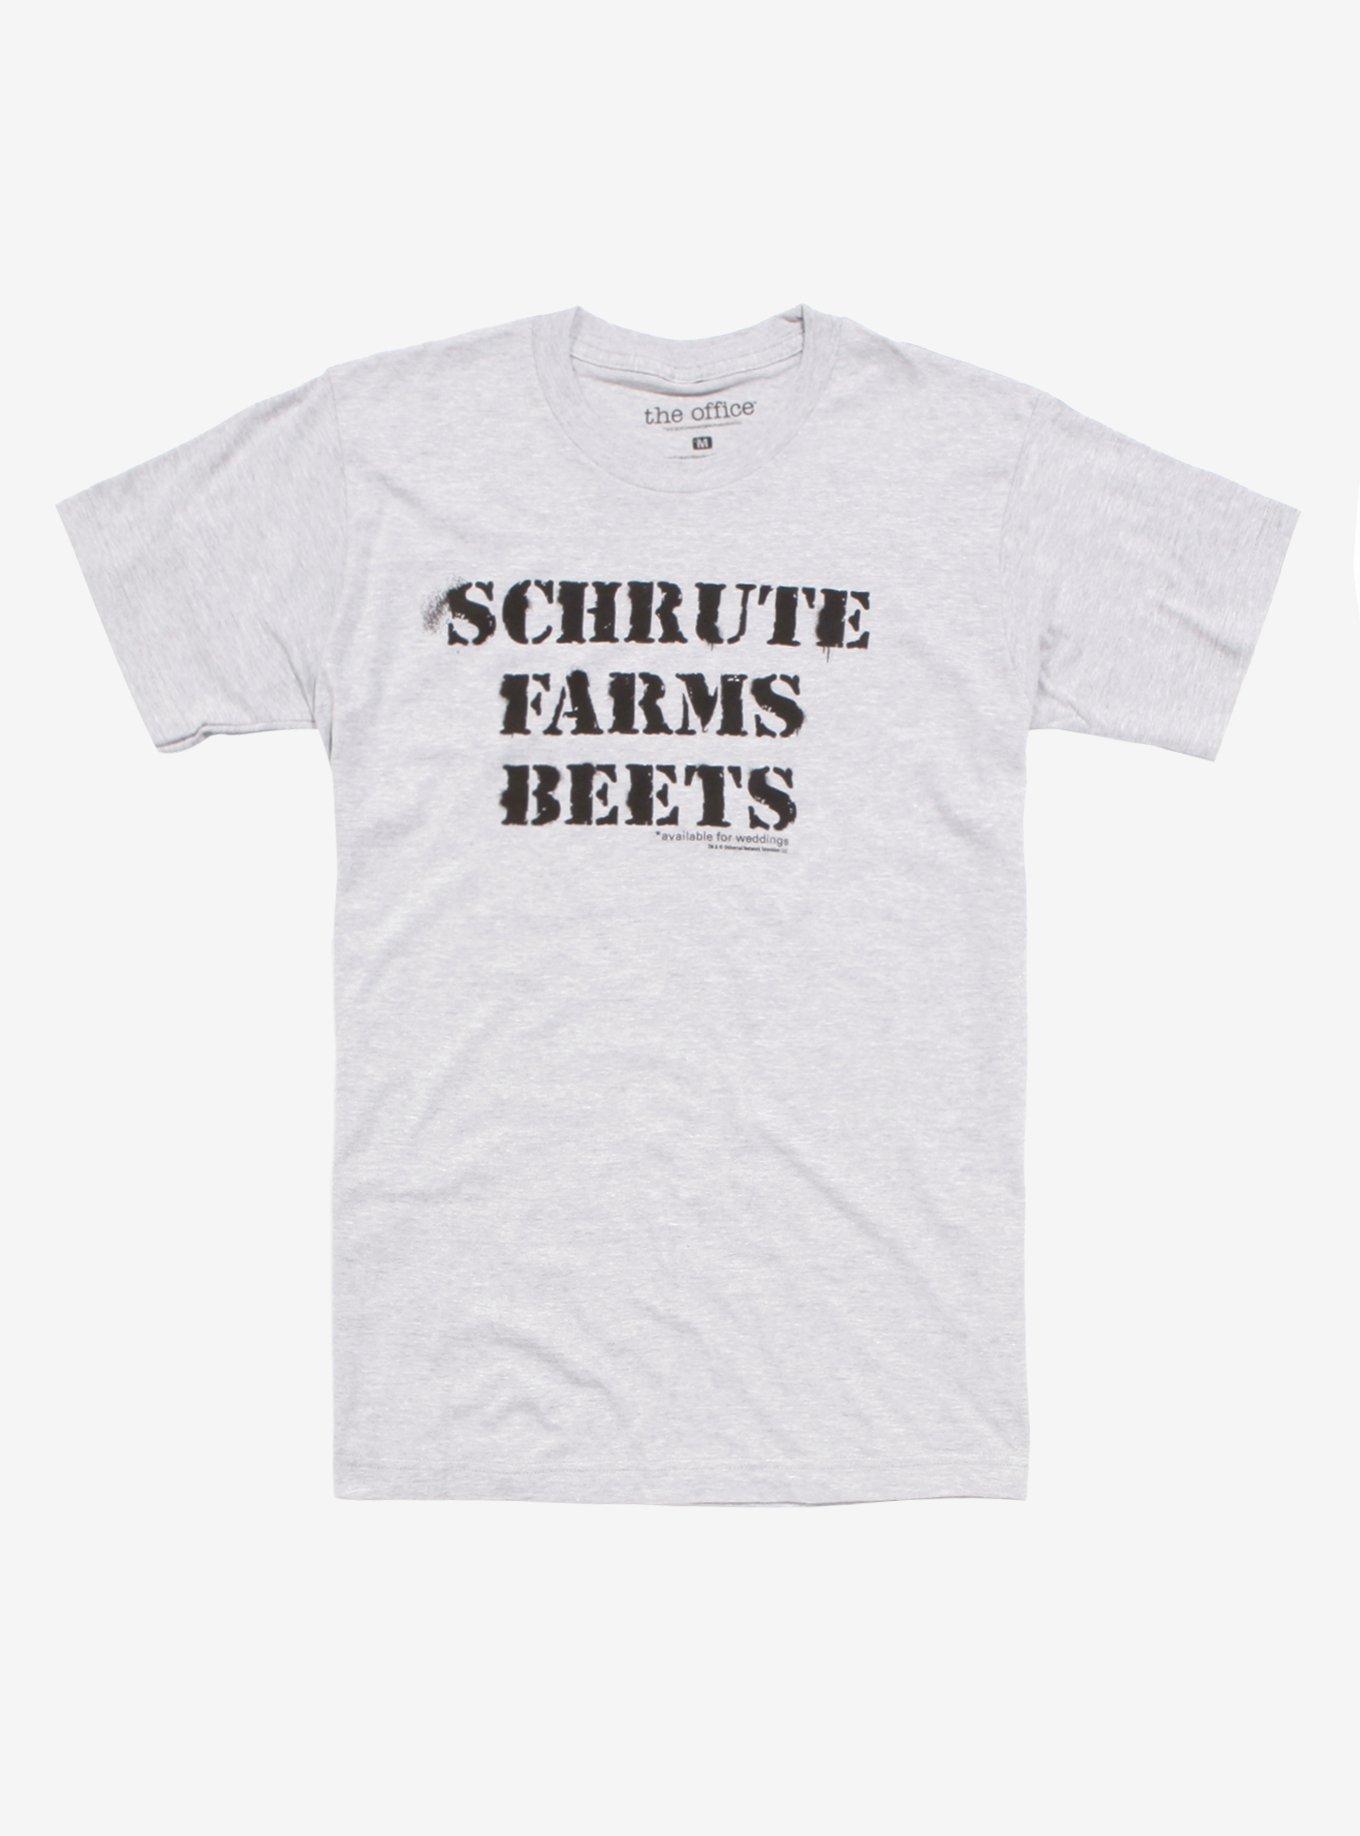 The Office Schrute Farms Beets T-Shirt, GREY, hi-res